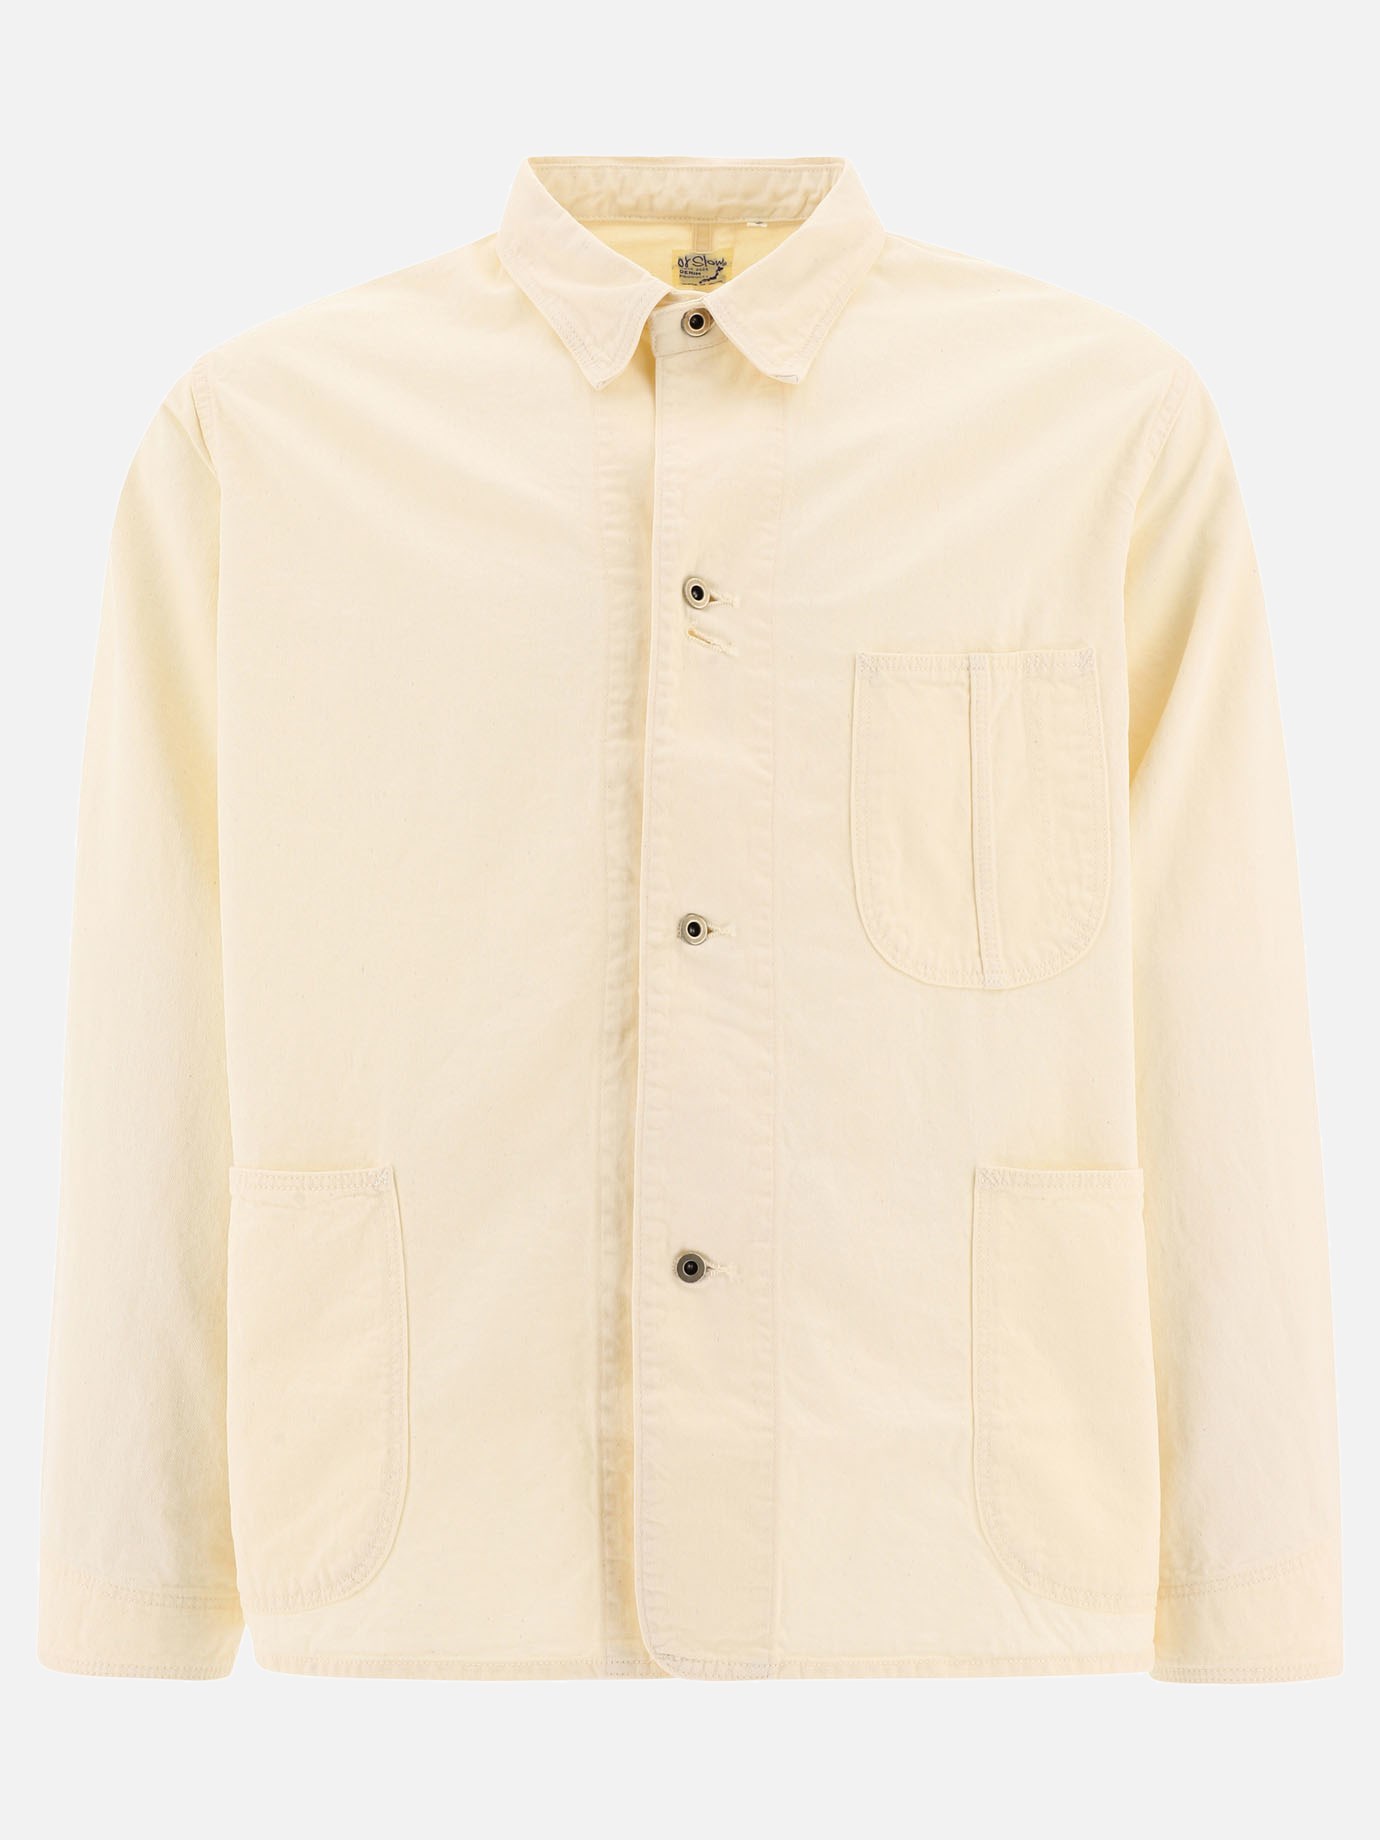 Overshirt  1940's by OrSlow - 3